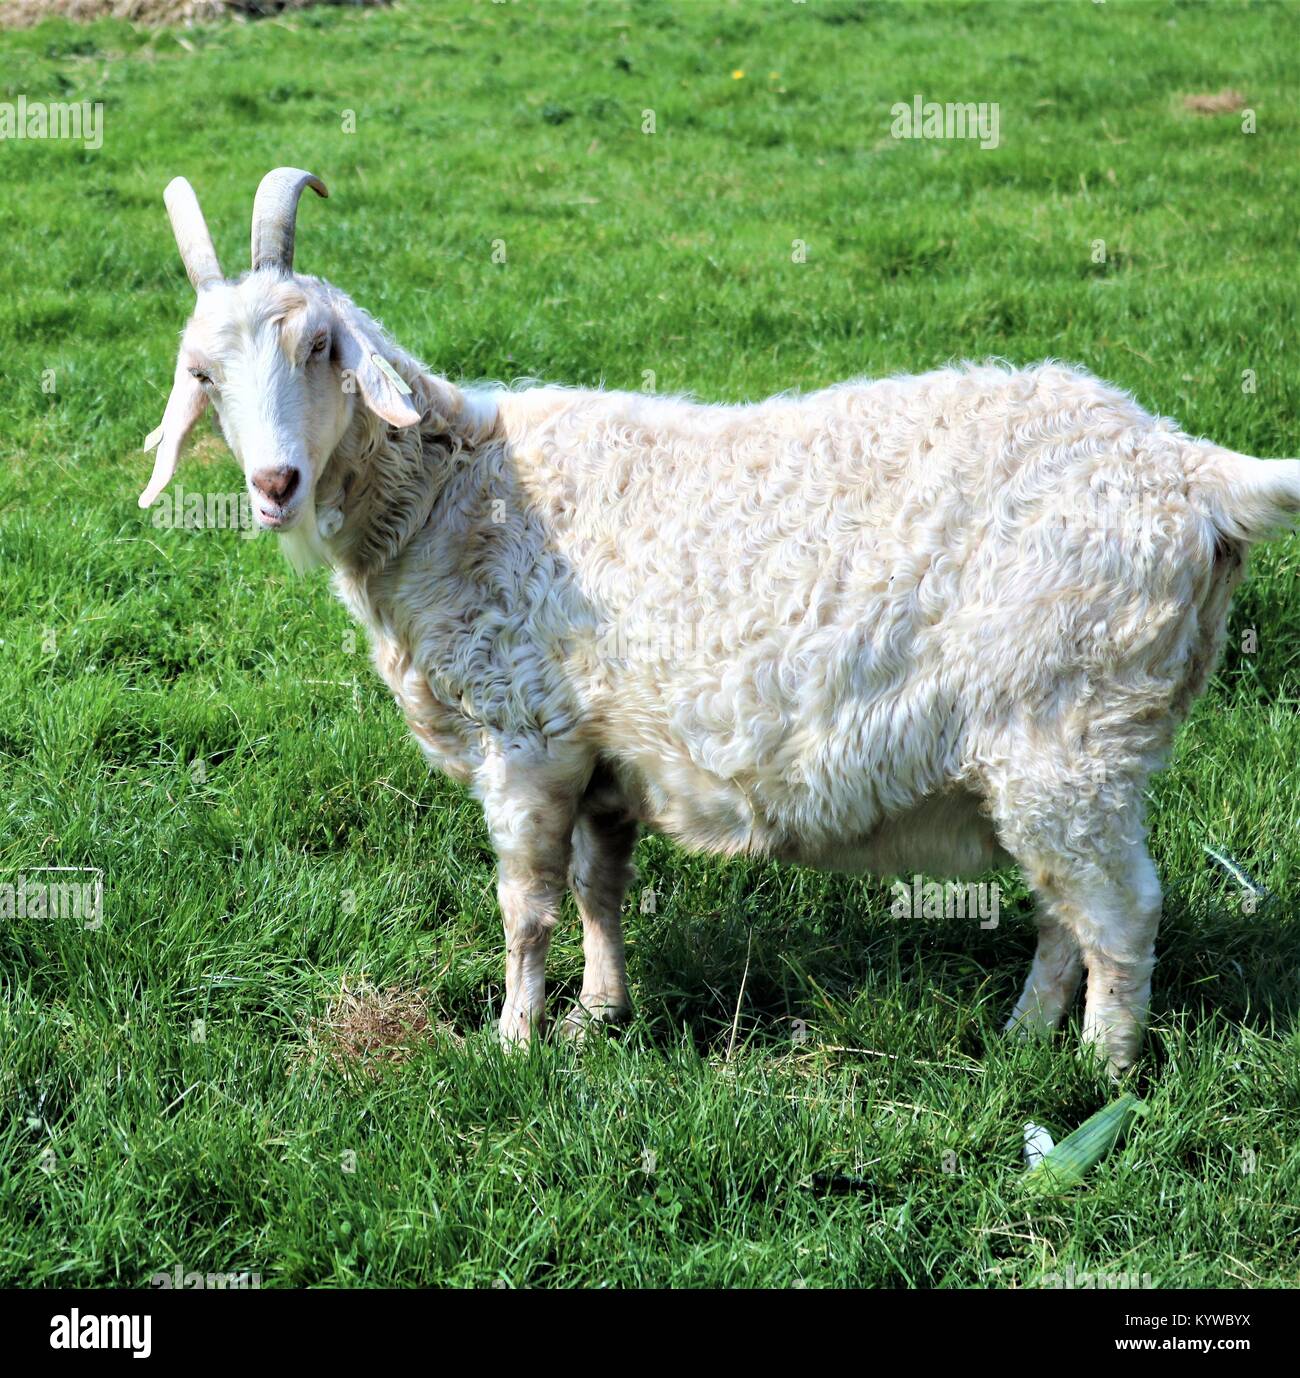 Horned goat in green field looking at camera Stock Photo